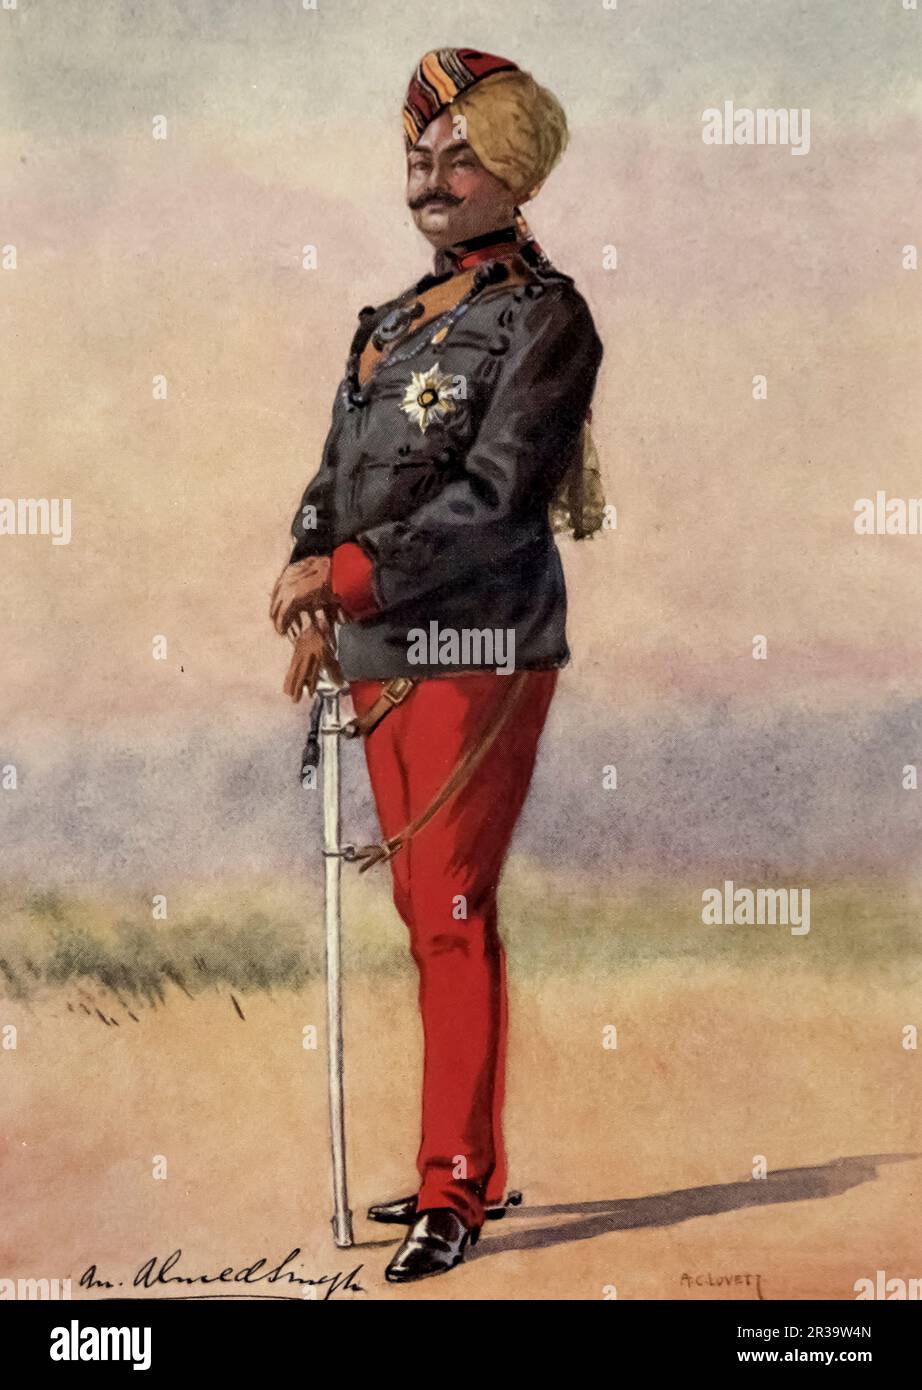 42nd Deoli Regiment Honorary Major H.H. Sir Umed Singh Bahadur, G.C.I.E.. K.C.S.I. Maharao of Kota (Rajputana) painted by Major Alfred Crowdy Lovett, (1862-1919) from the book ' The armies of India ' by Major George Fletcher MacMunn, (1869-1952) Publication date 1911 Publisher London, Adam and Charles Black Stock Photo